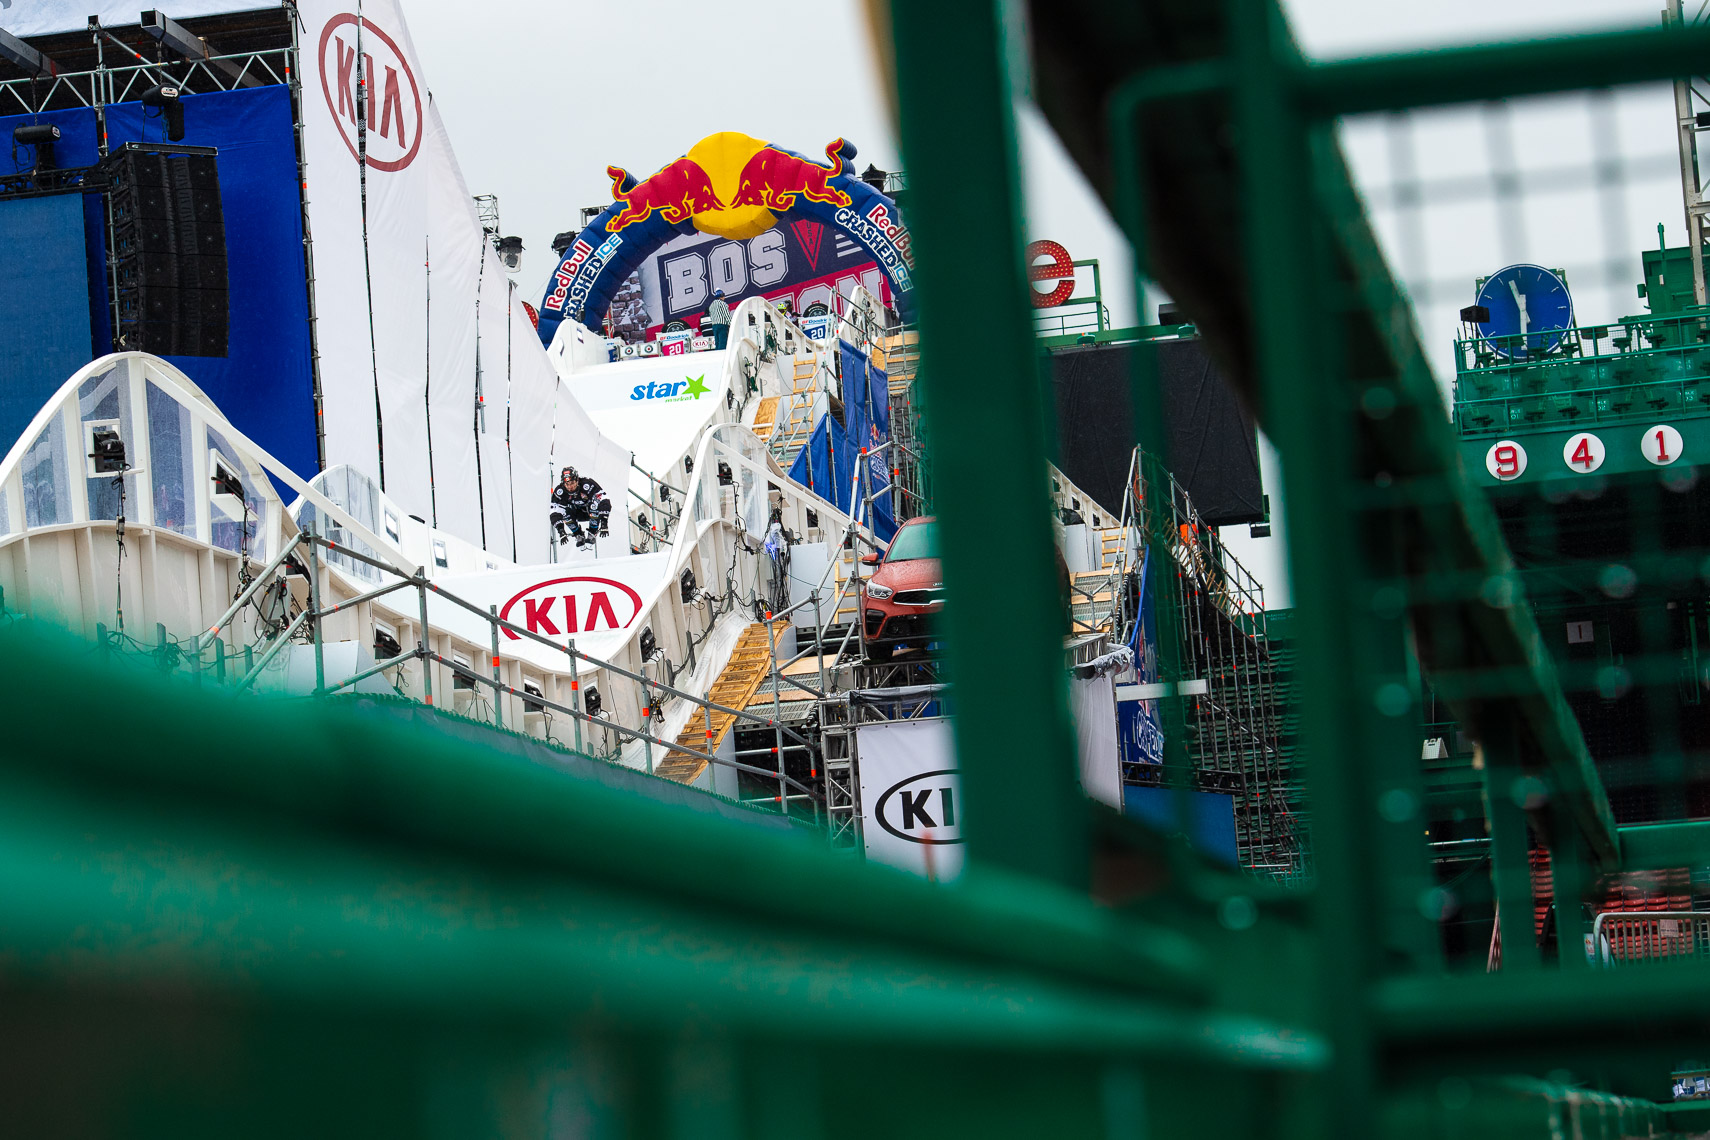 RT_20190208_Red_Bull_Crashed_Ice_BOS-3878